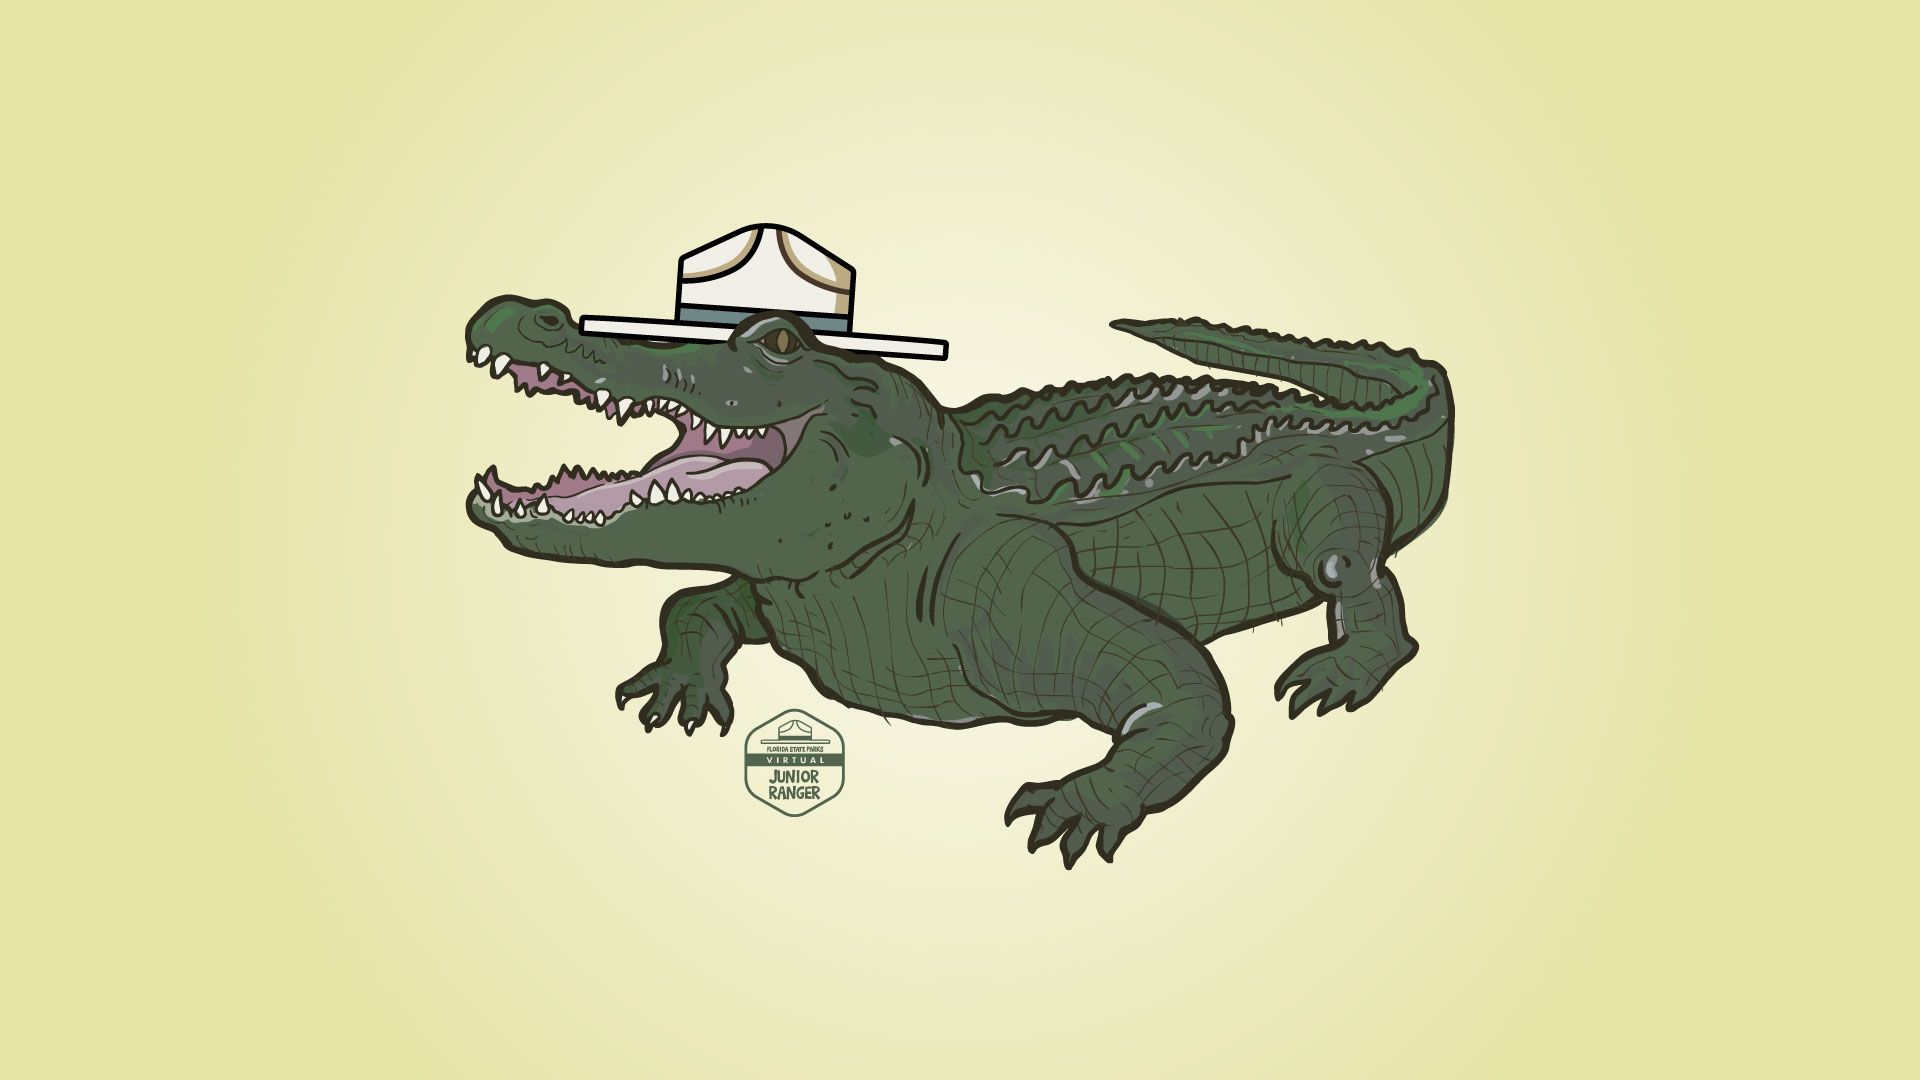 Drawing of an alligator wearing a ranger hat